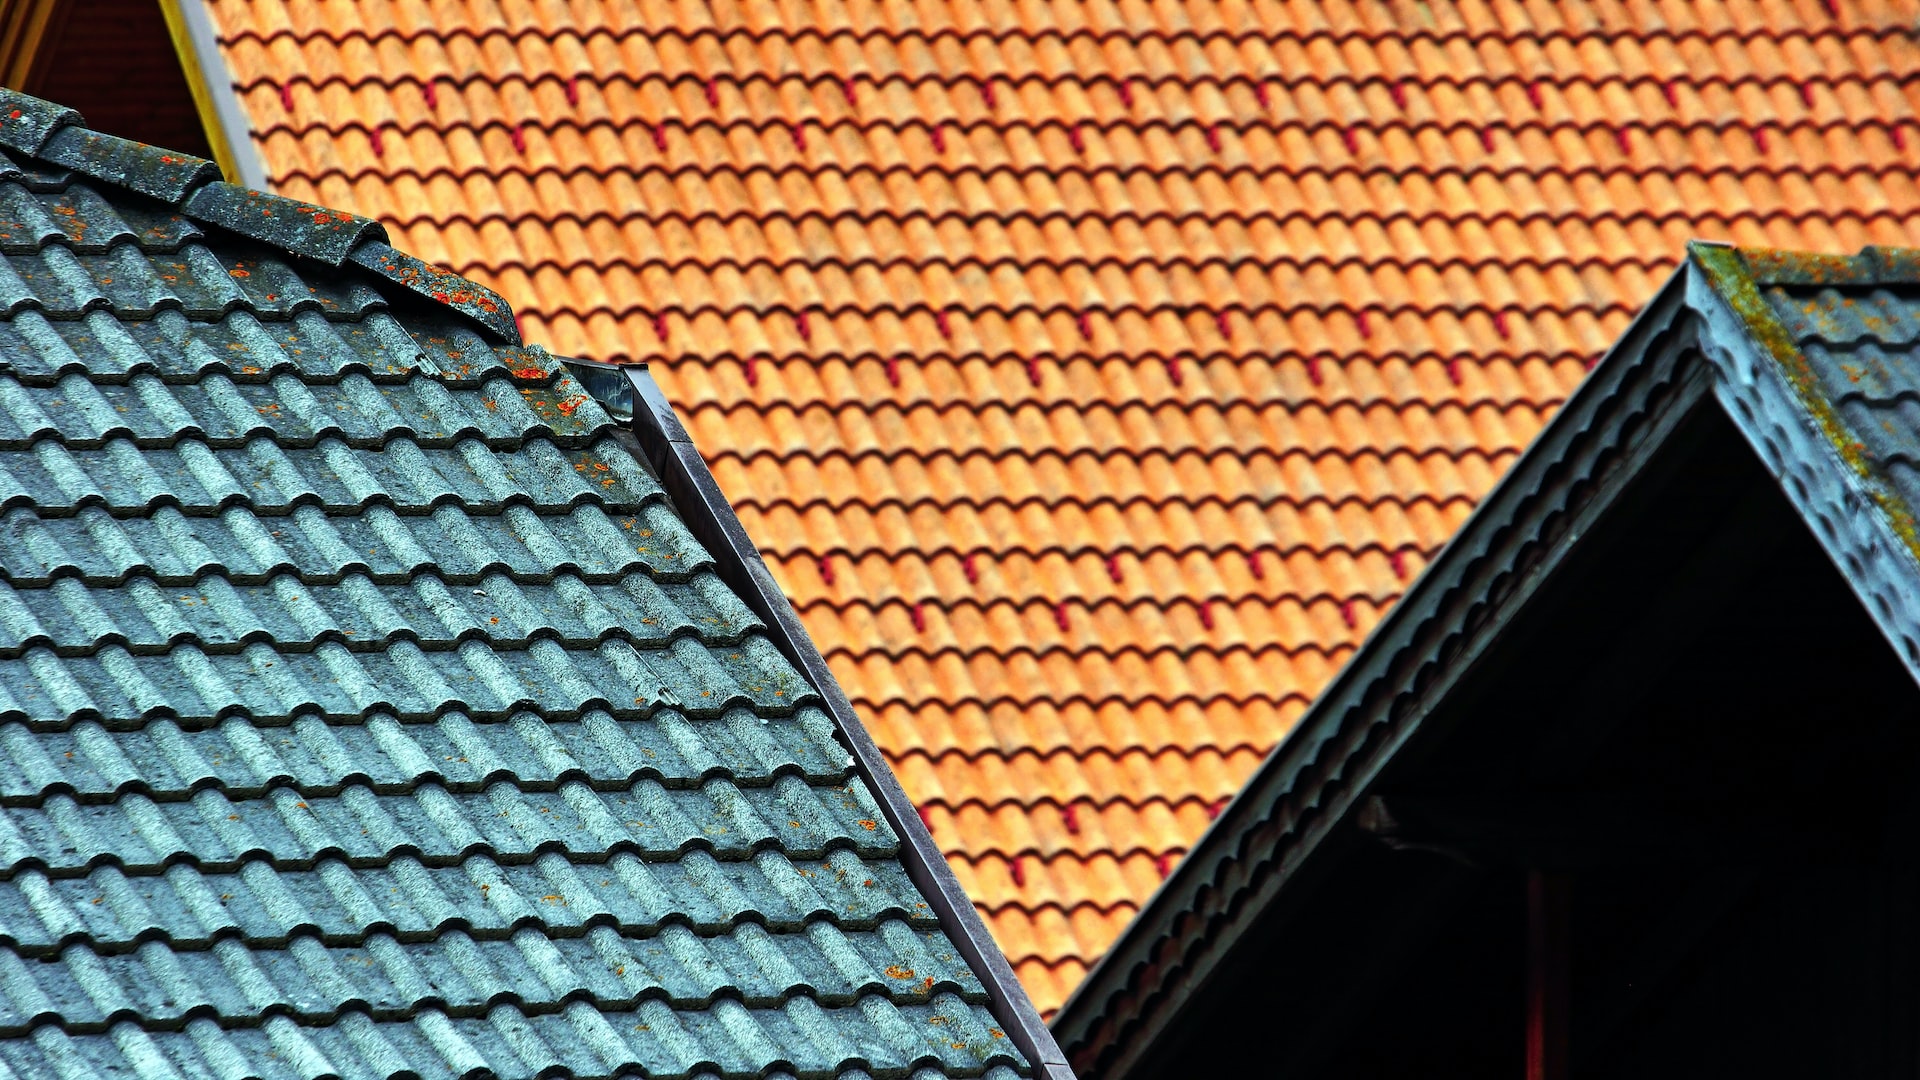 Different Roof Types to Satisfy Varying Climates